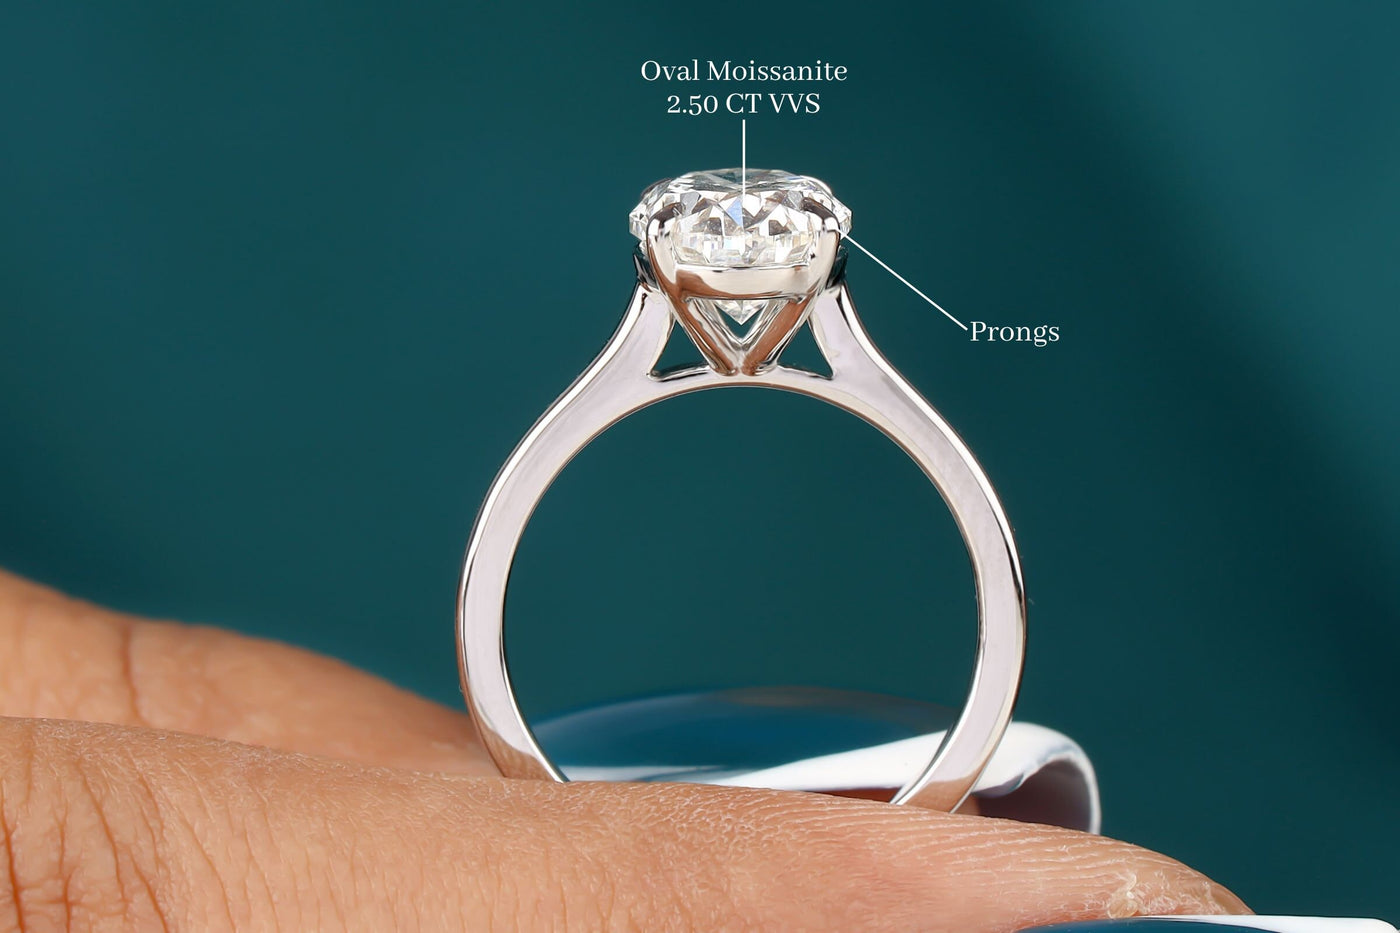 2.50 Carat Colorless Oval Cut Moissanite Prong Setting Ring, Solitaire Engagement Ring, Oval Cut Wedding Ring, 14K White Gold Promise Ring